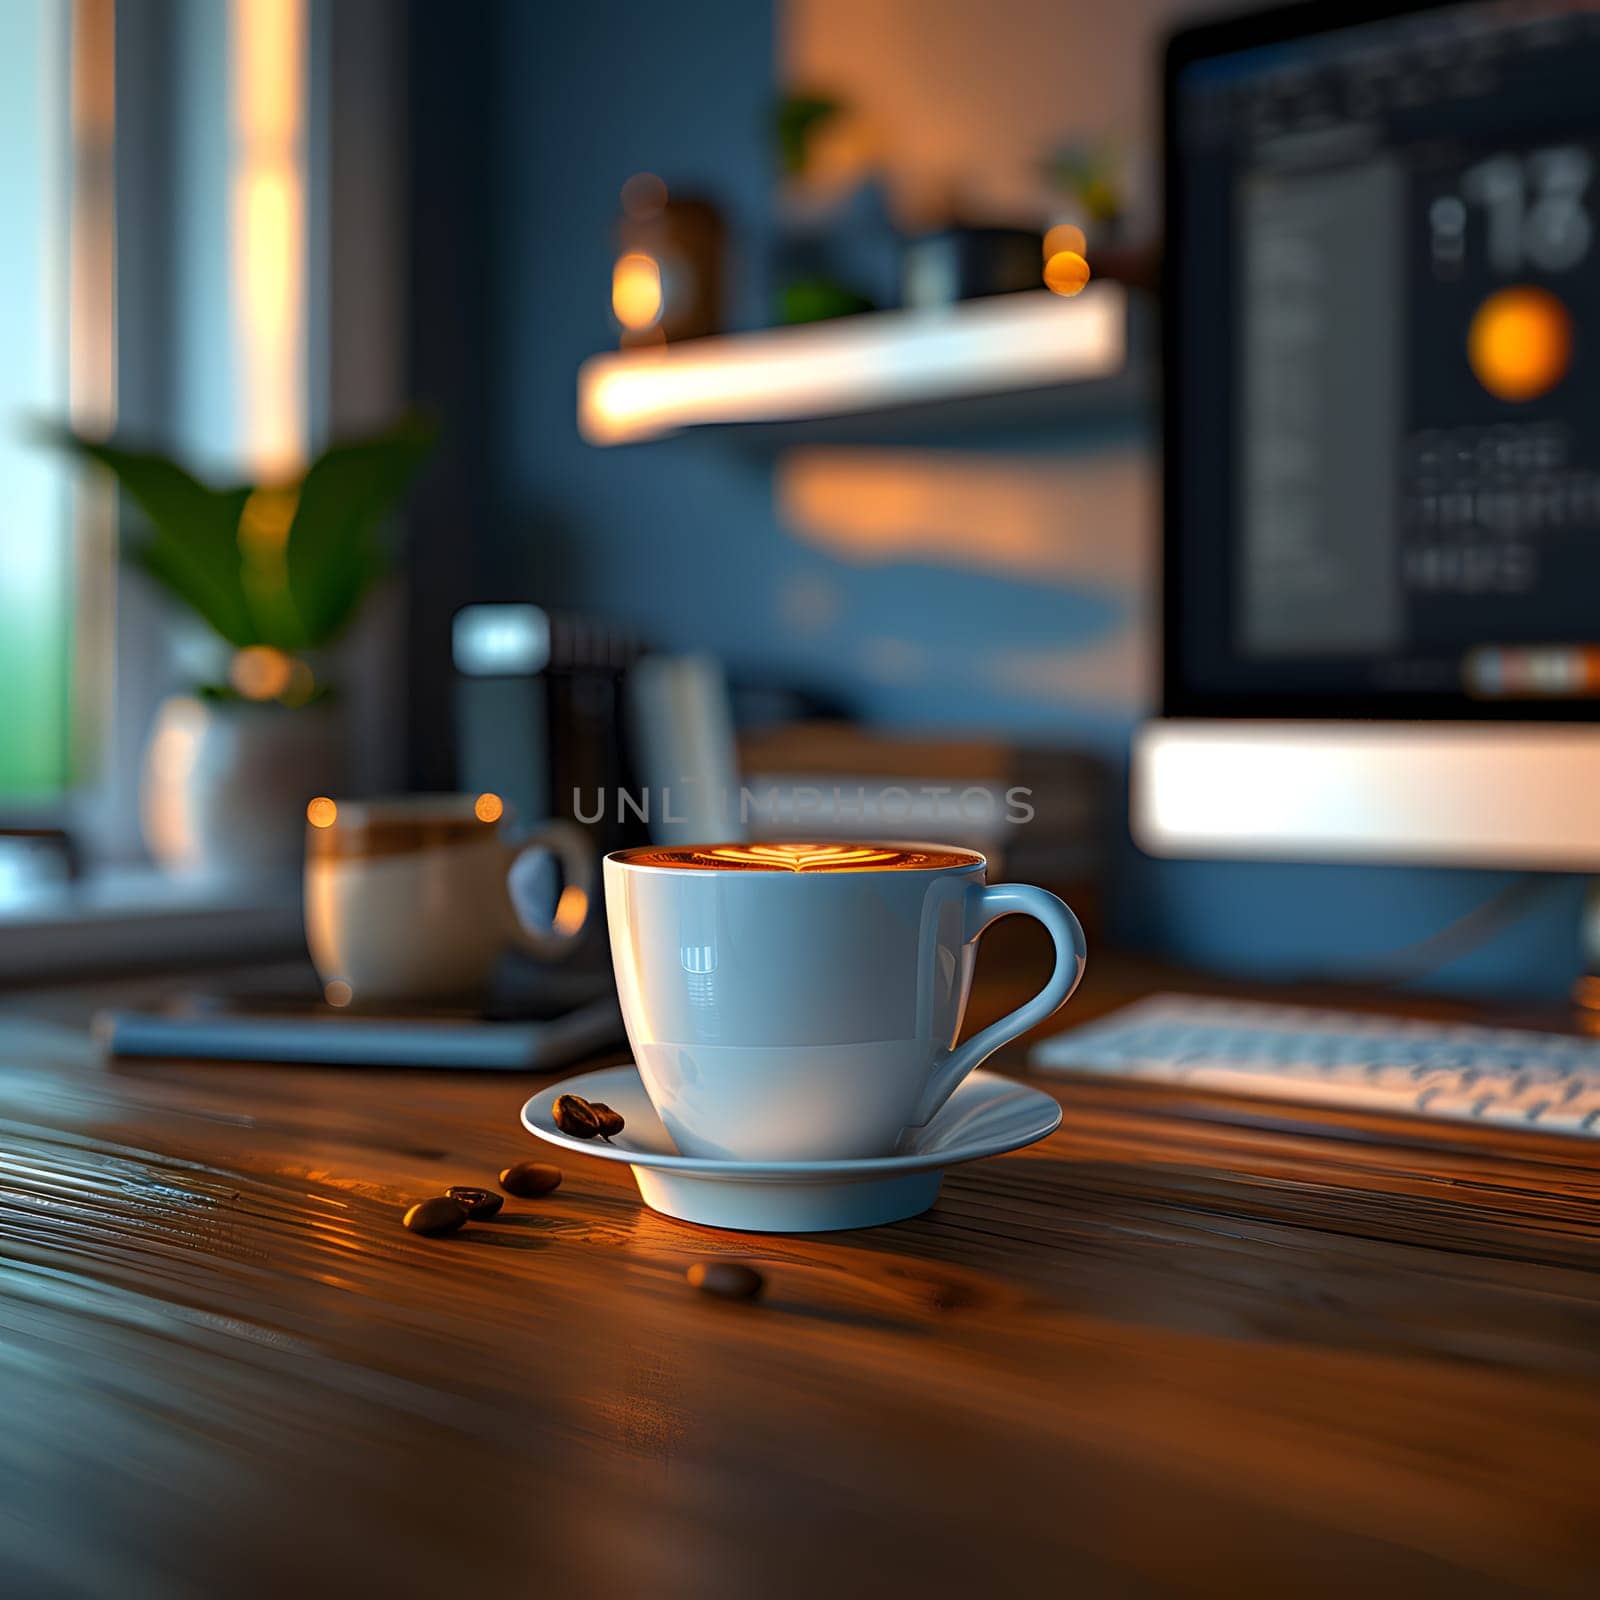 A coffee cup on a saucer beside a computer on a desk by Nadtochiy